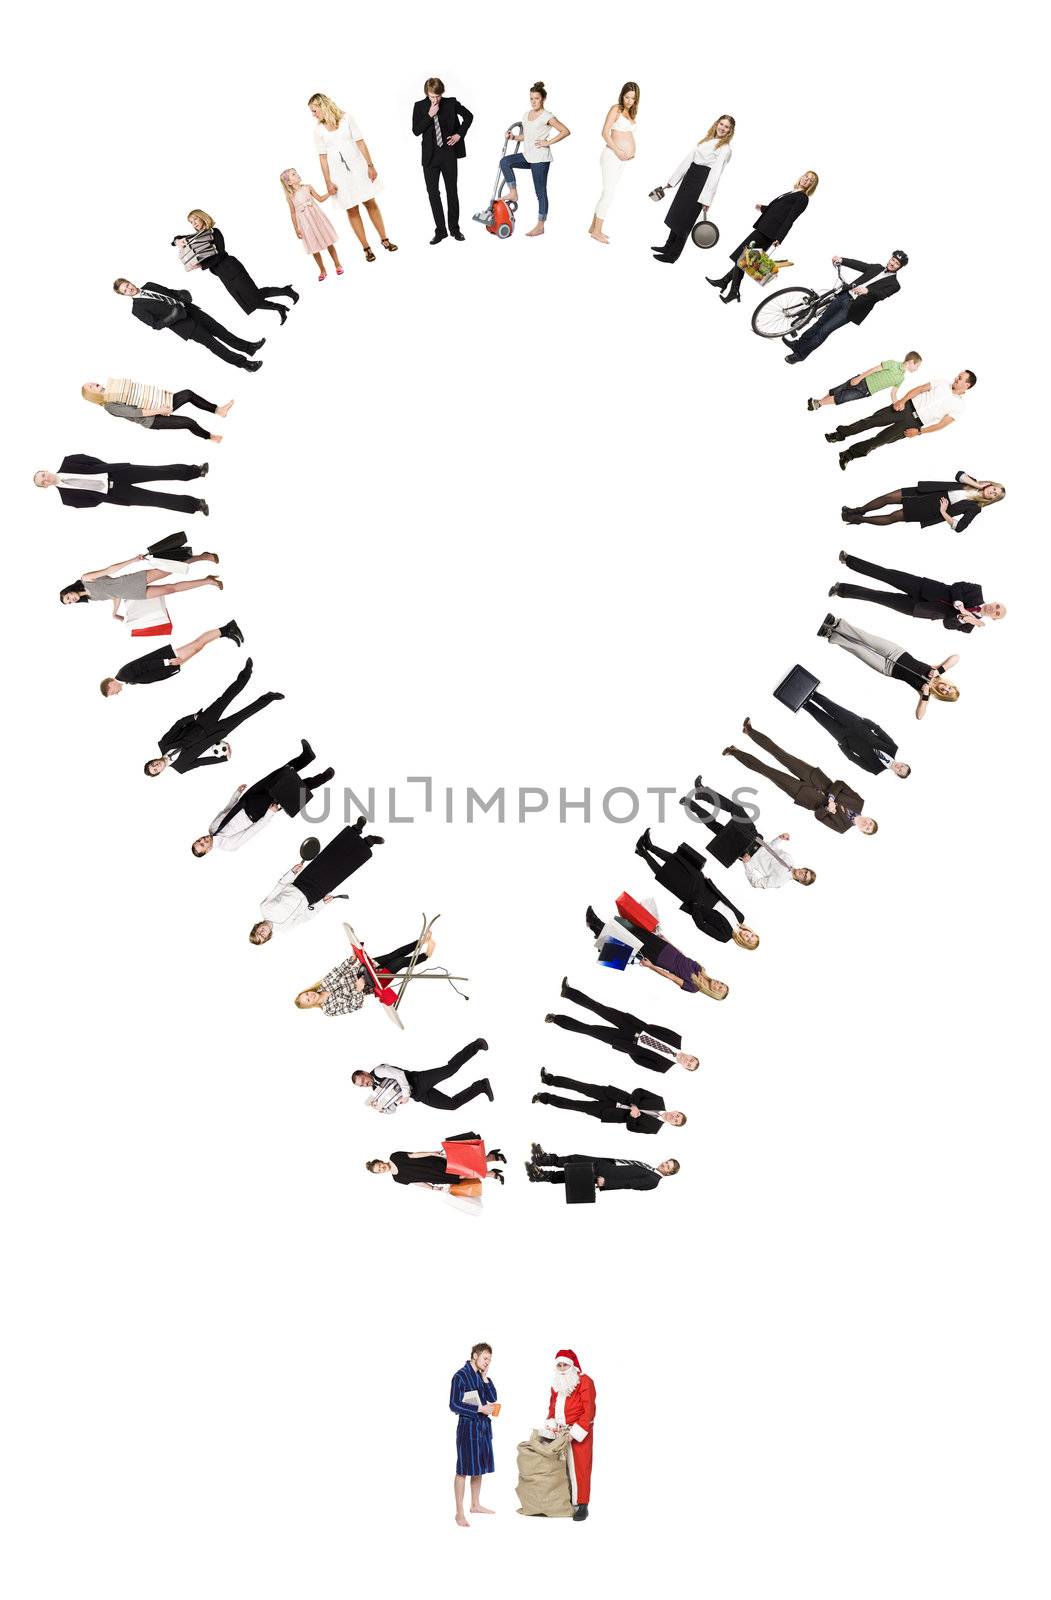 Collage of people formed as a light bulb isolated on white background